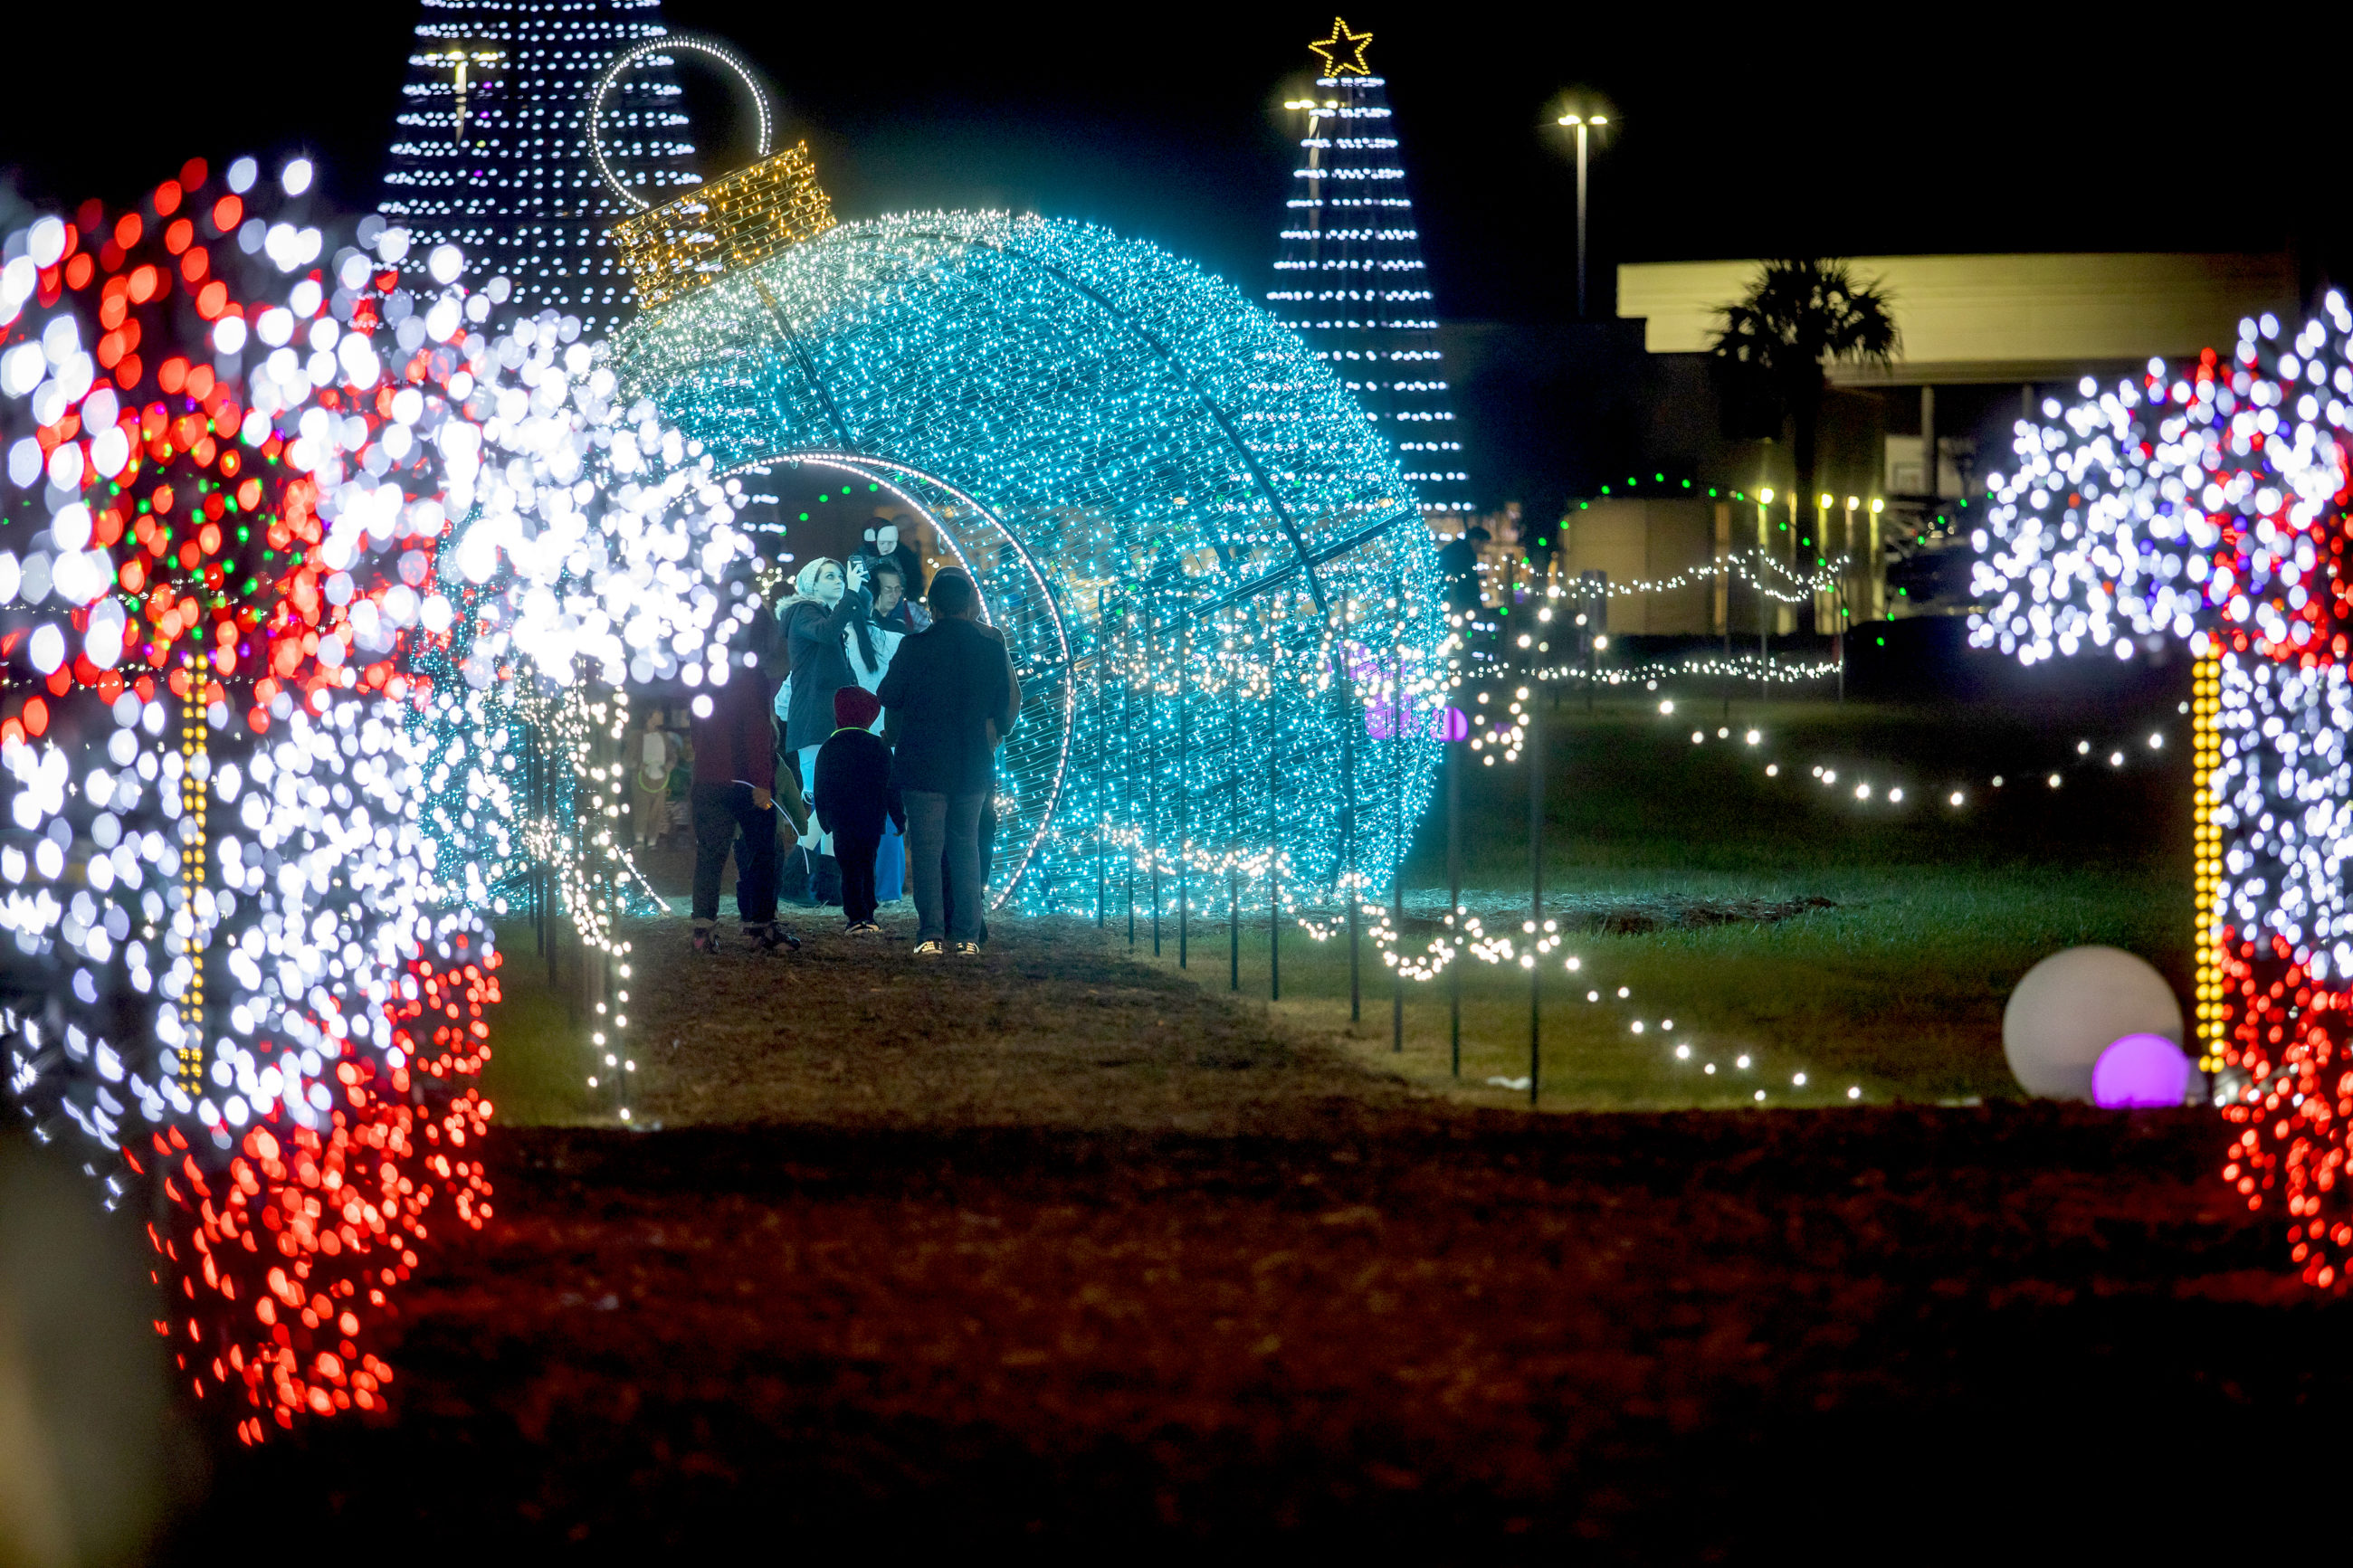 Check out Baton Rouge General’s Holiday Lights Family Night Dec. 23